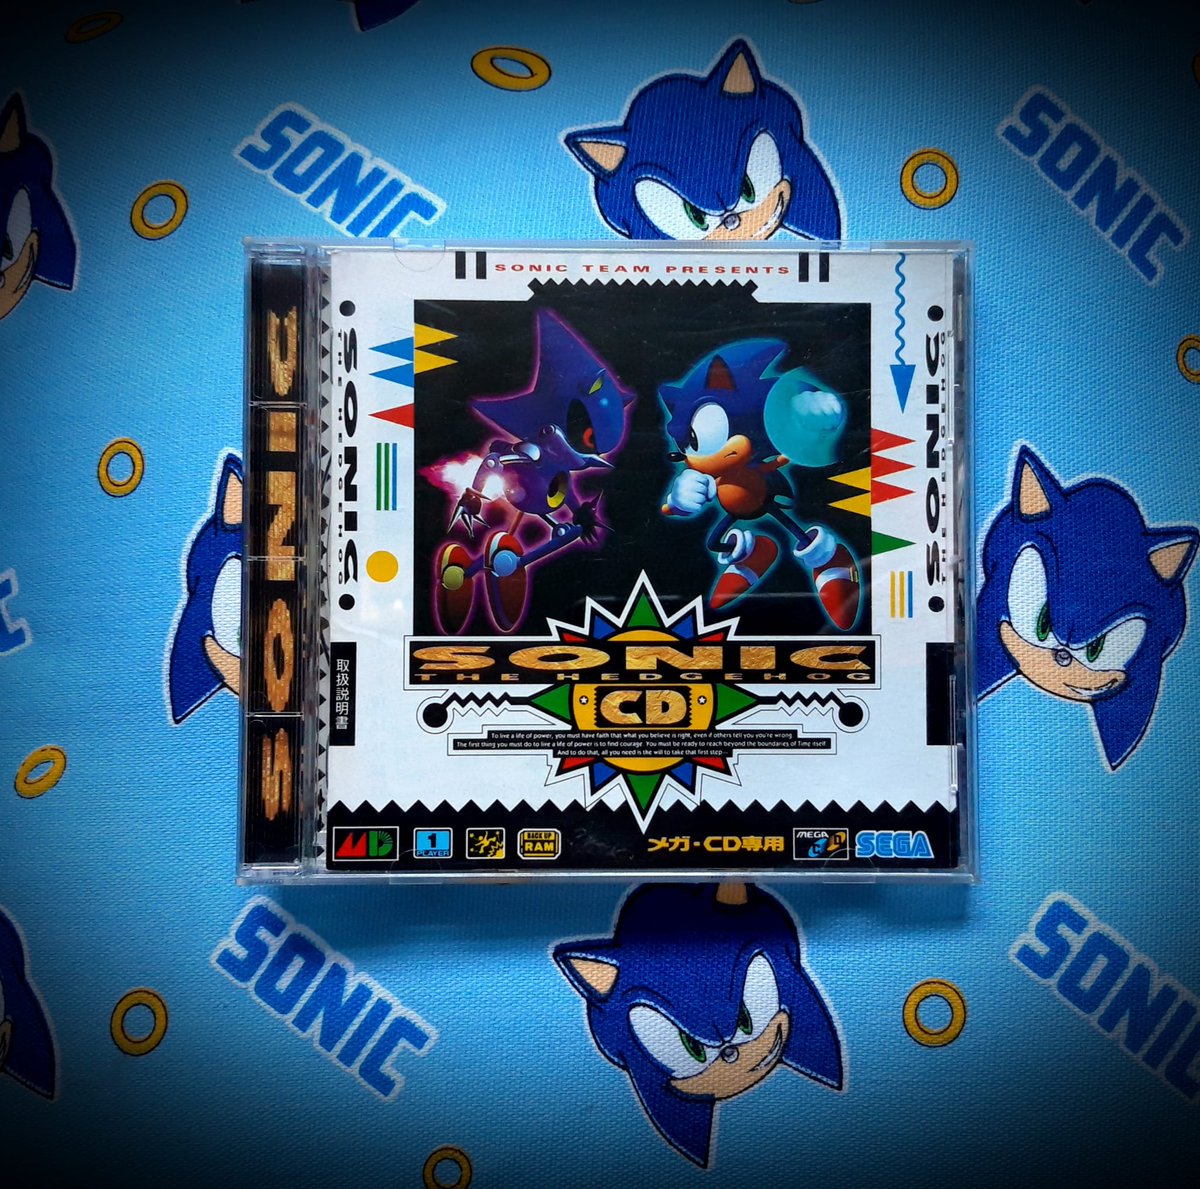 Speeding through time this #megacdmonday, featuring the blue blur in SonicCD

A killer app for #SEGA's #CD with great music and beautiful visuals, making it one of the best #Sonic games ever made! 🌀💨

What do you think?

#MegaDriveMonday #GamersUnite #RETROGAMING #gaming #Retro